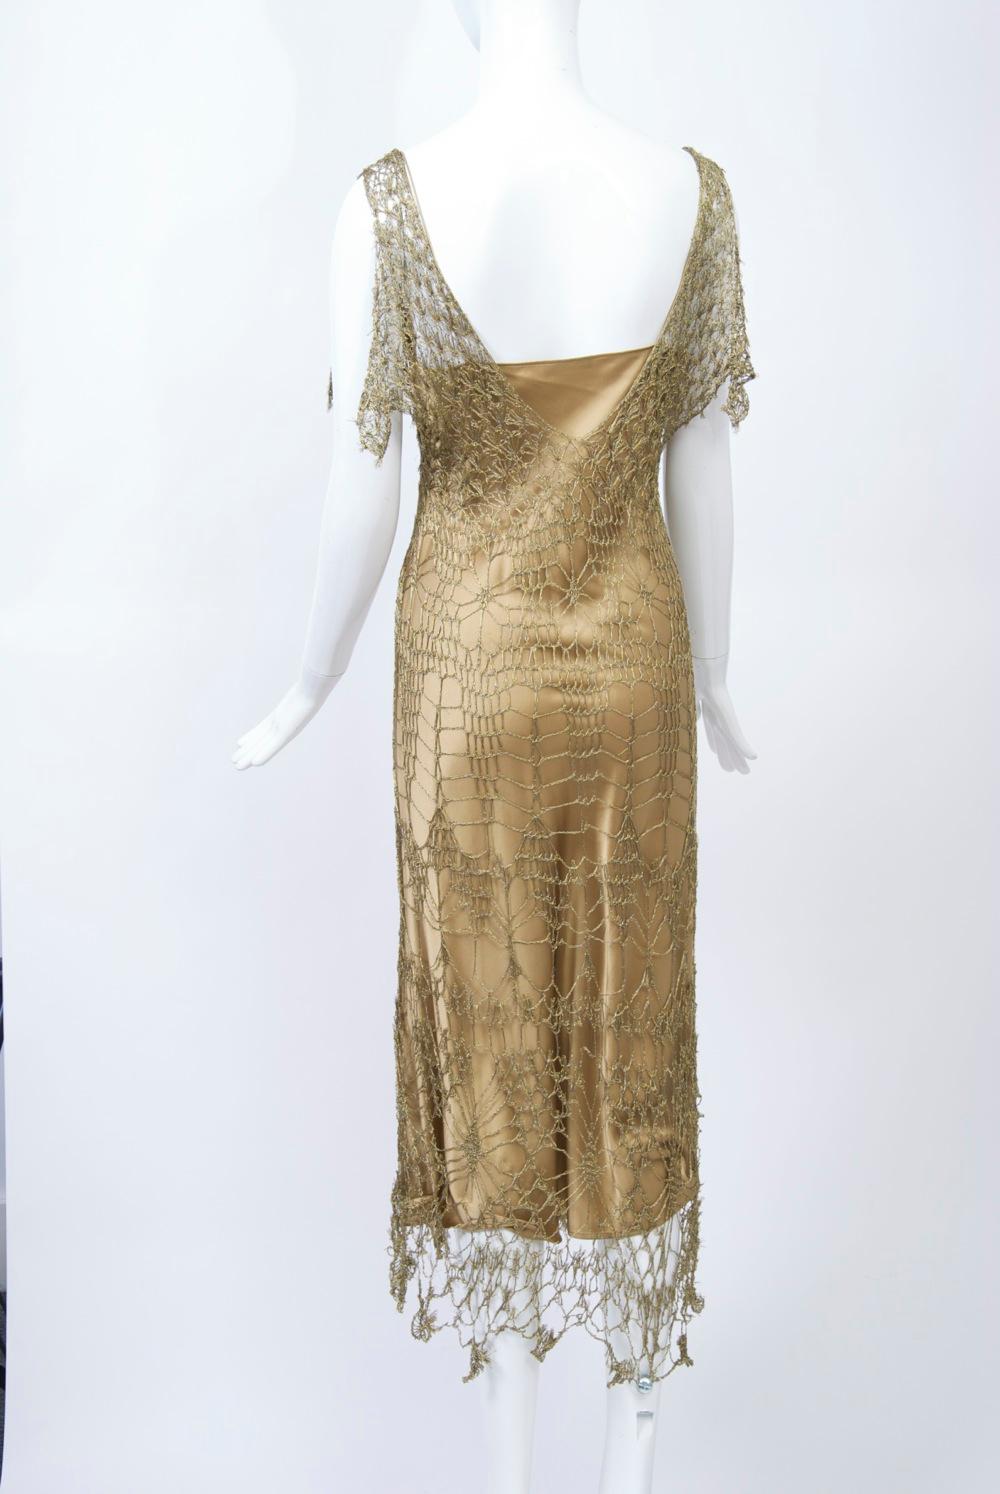 Donna Karan Metallic Gold Crochet Dress and Slip In Good Condition For Sale In Alford, MA